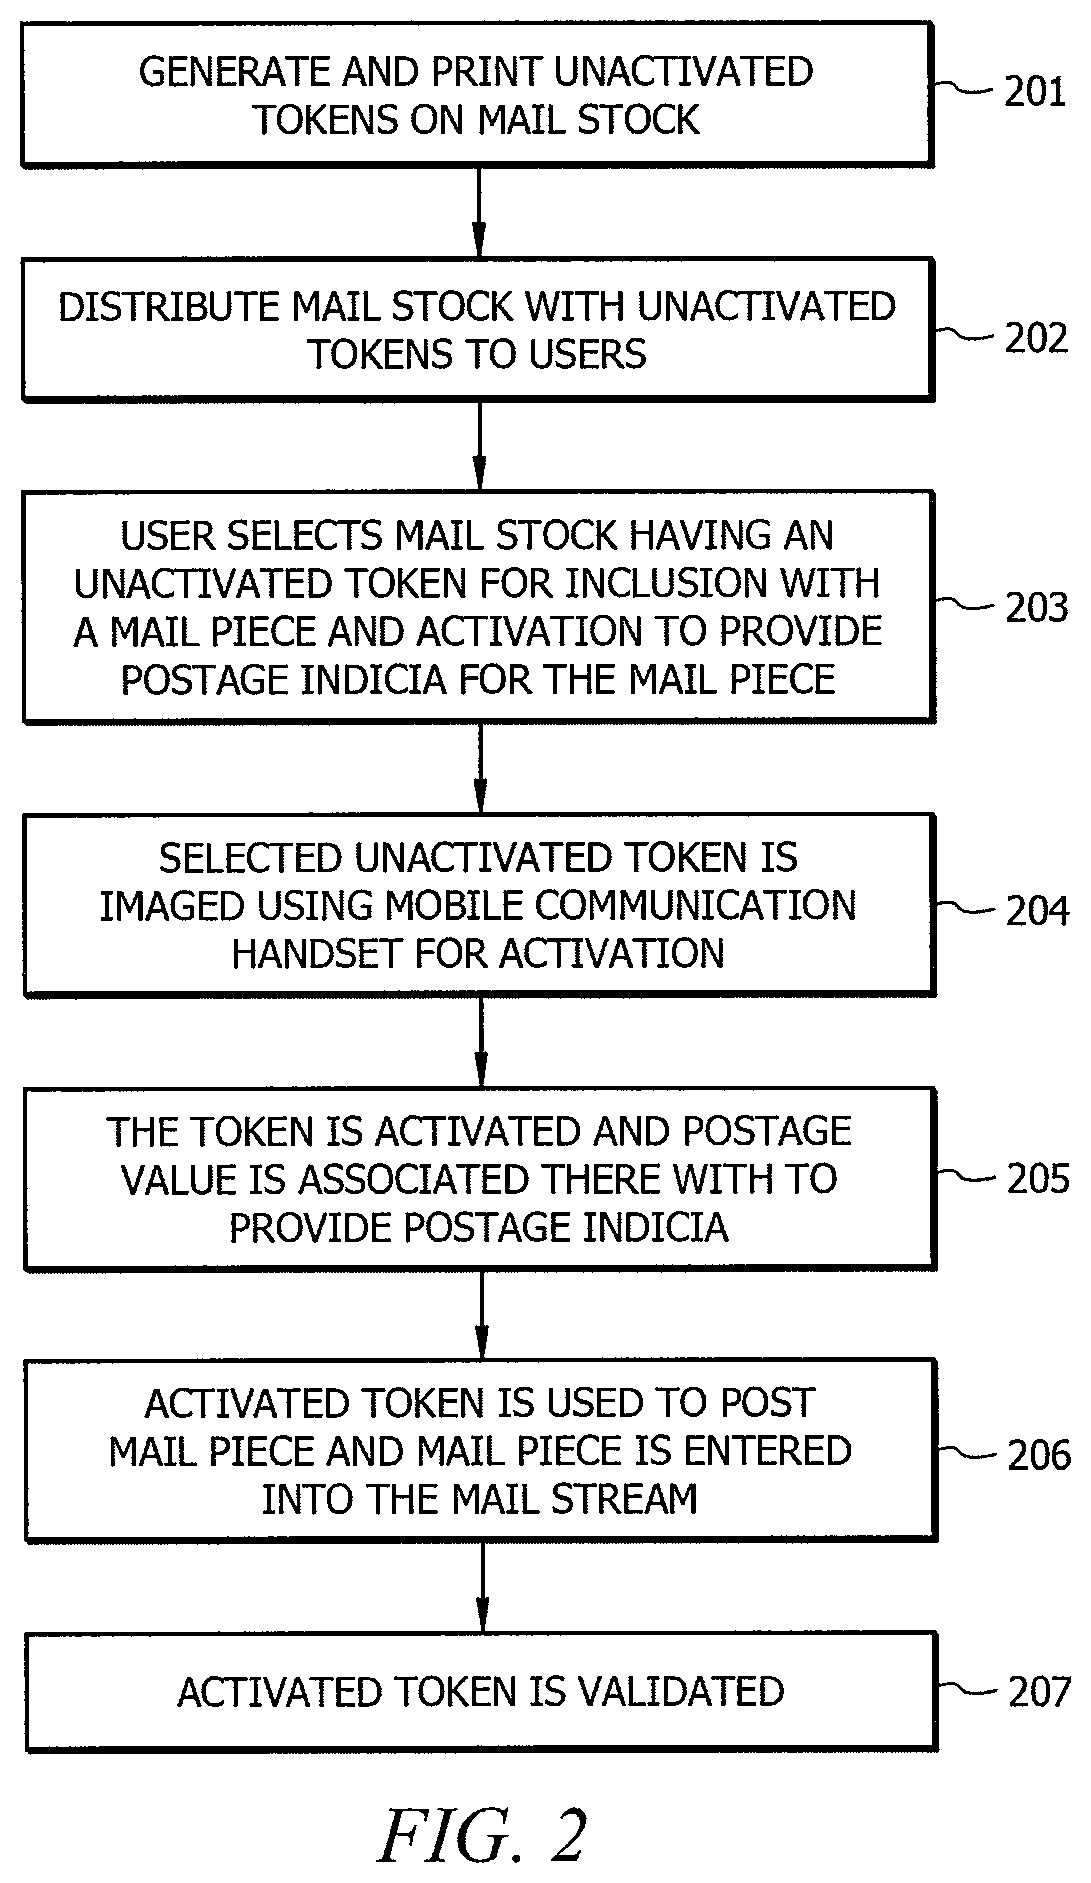 Systems and methods using mobile communication handsets for providing postage